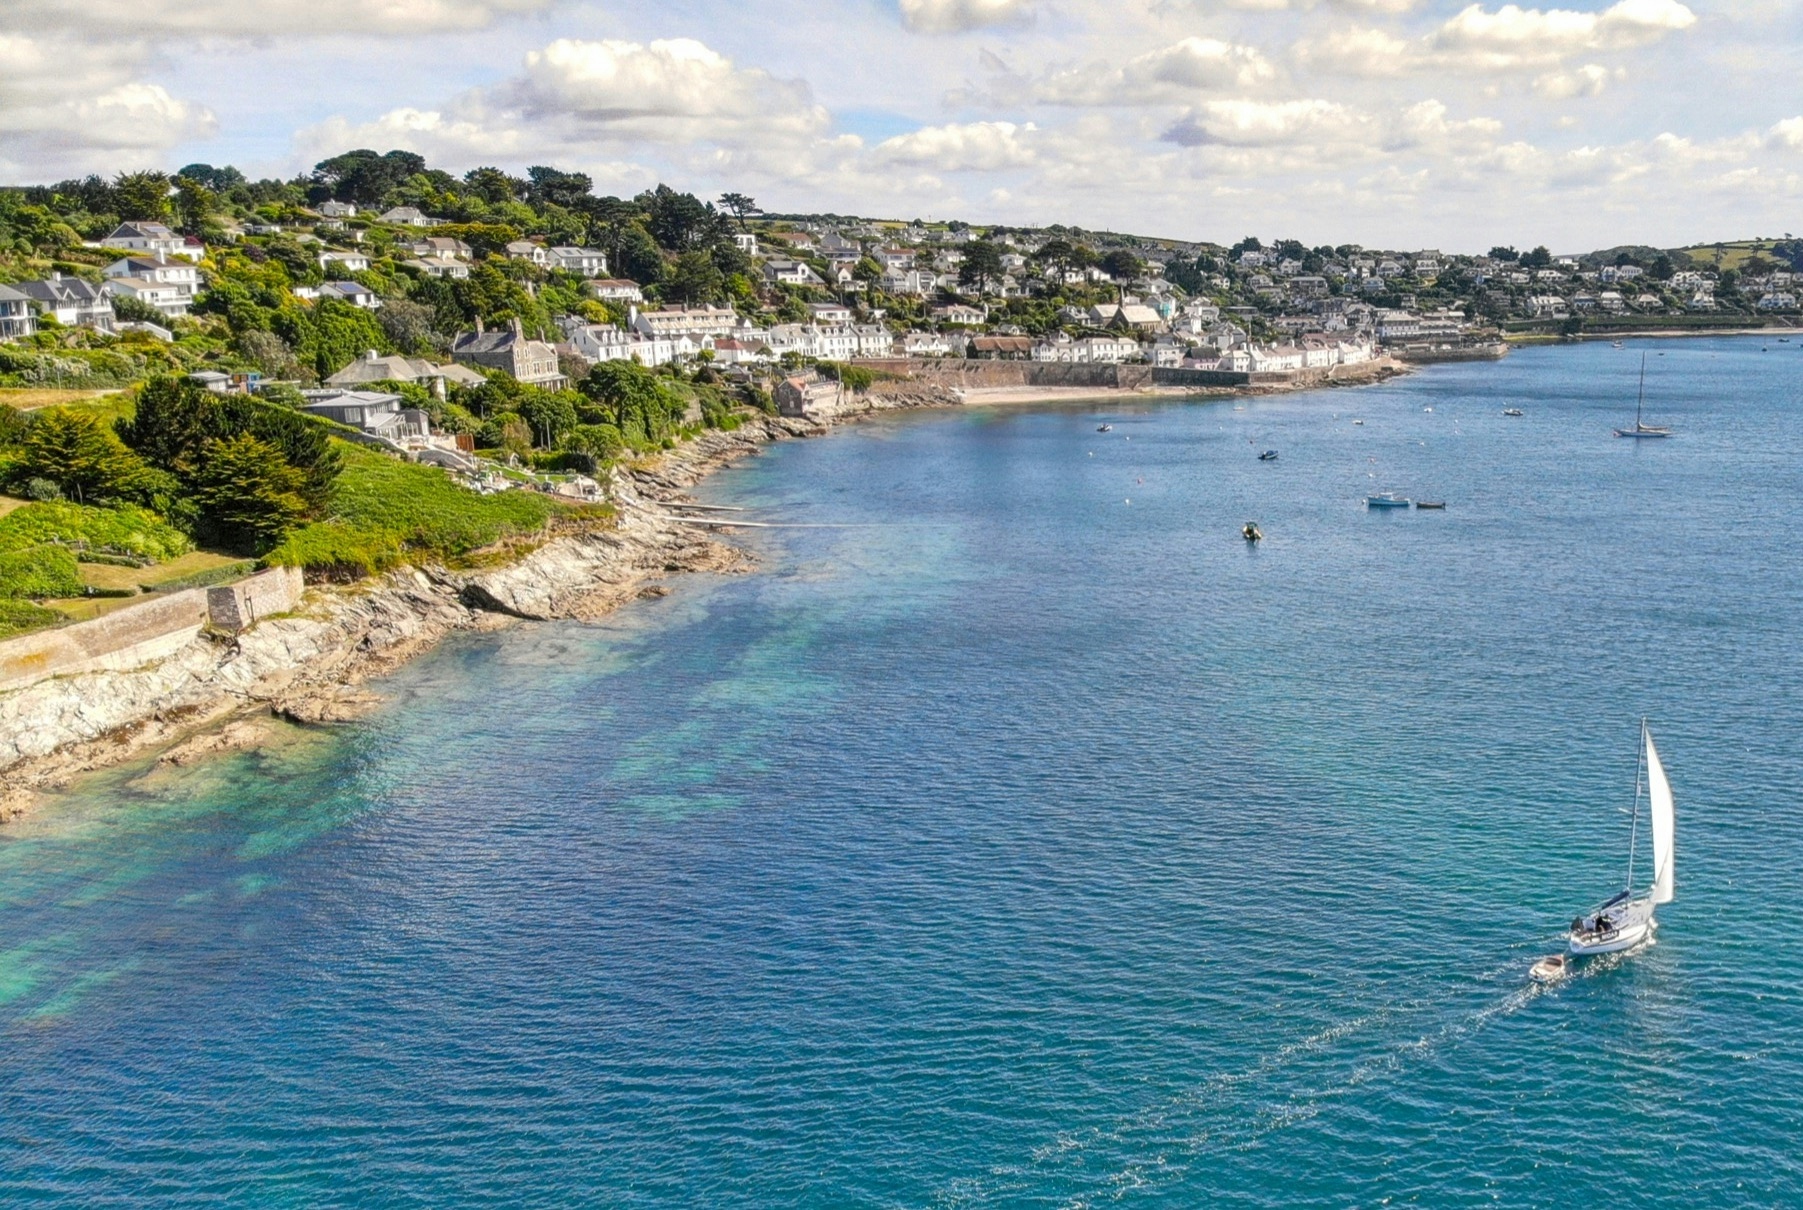 Ariel view of St Mawes